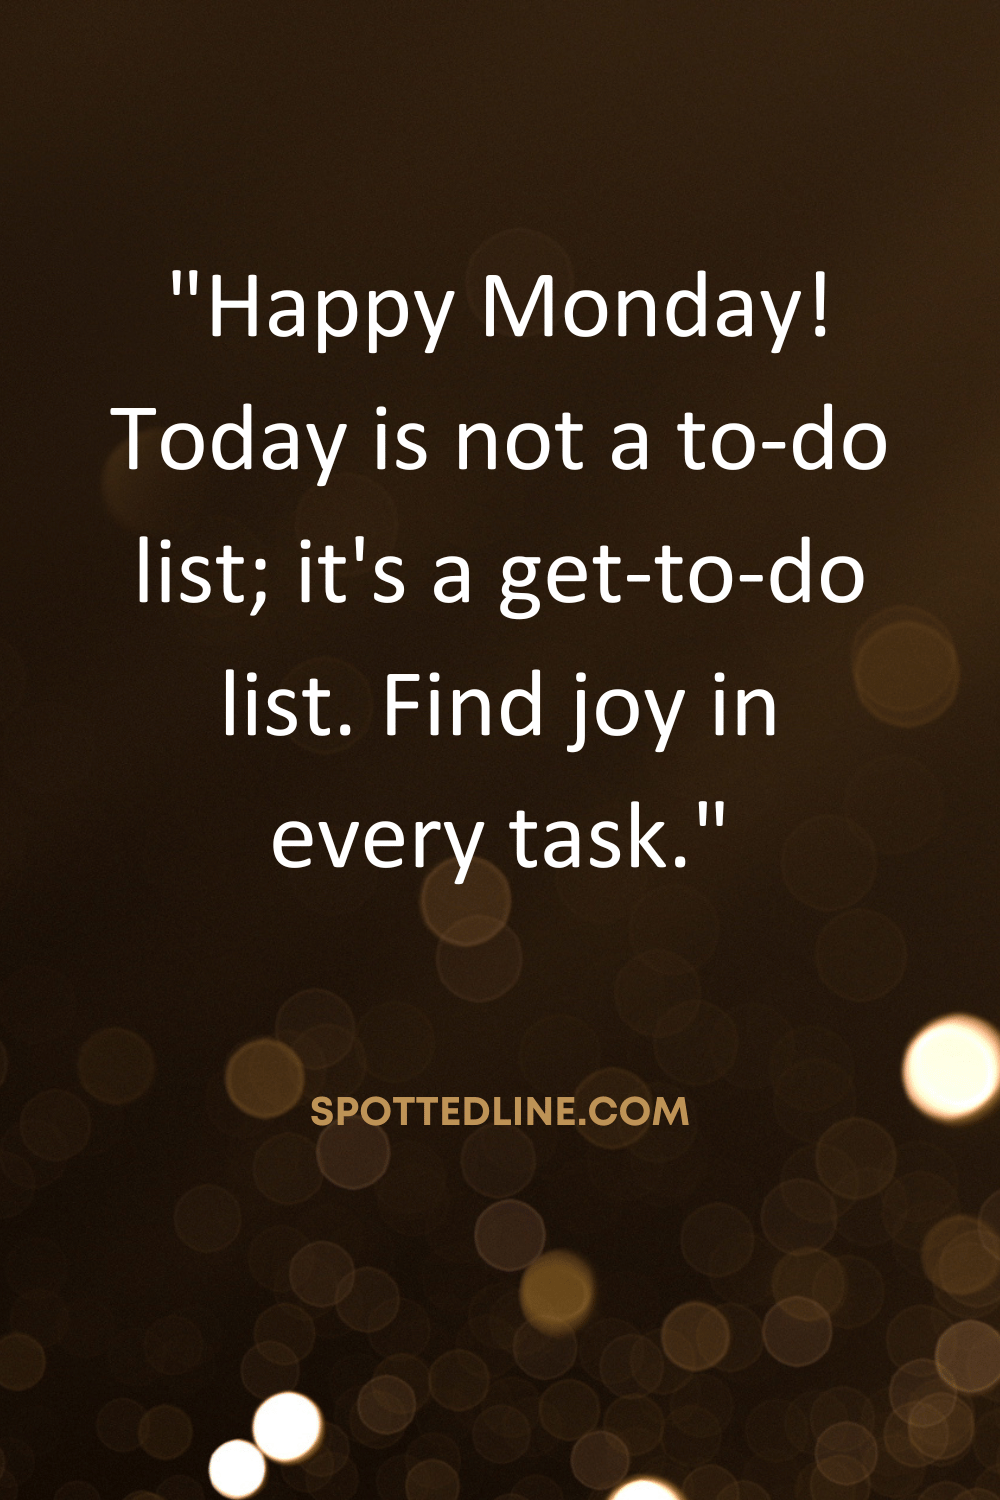 Quotes-on-Mondays-Get-to-Do-List